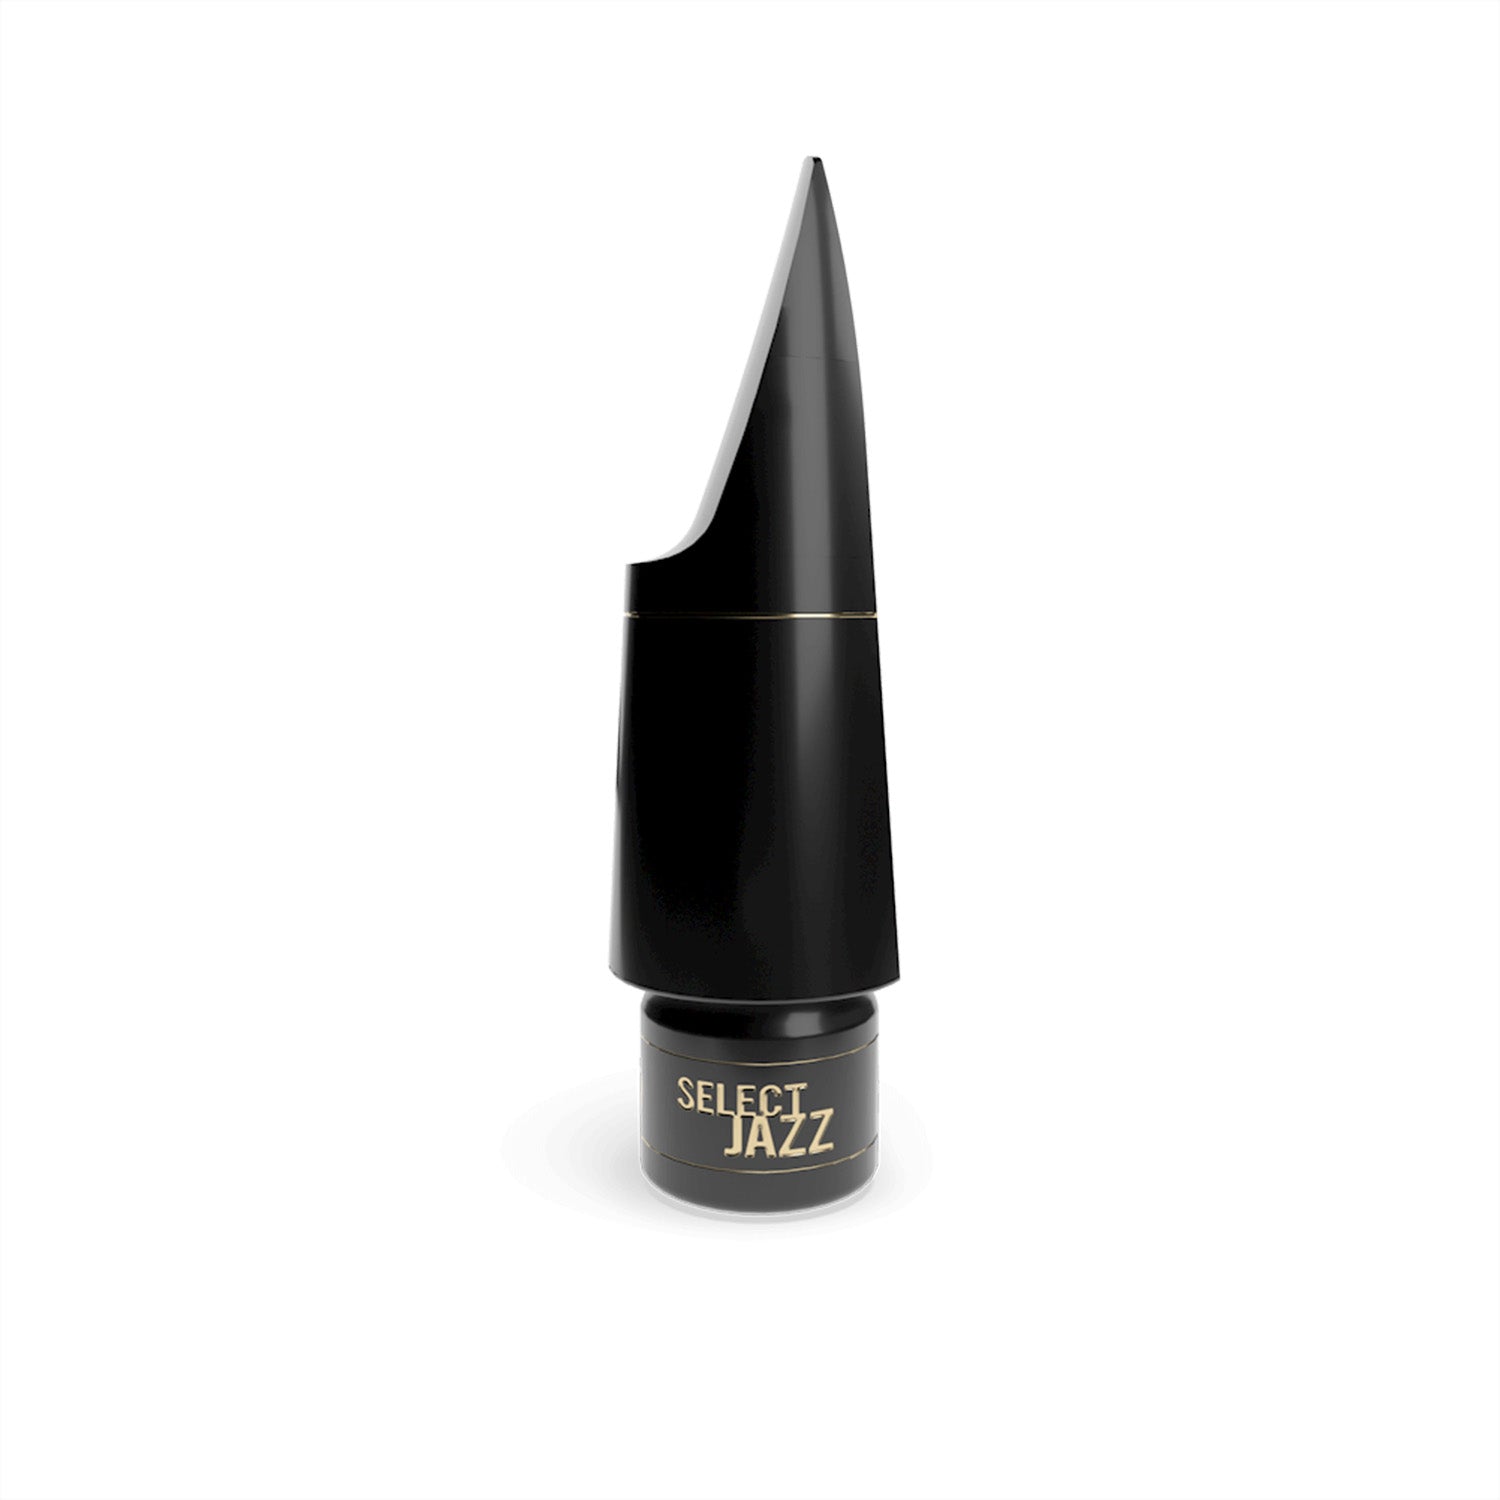 Side profile photo of D'addario Select Jazz Tenor Sax mouthpiece on a white background